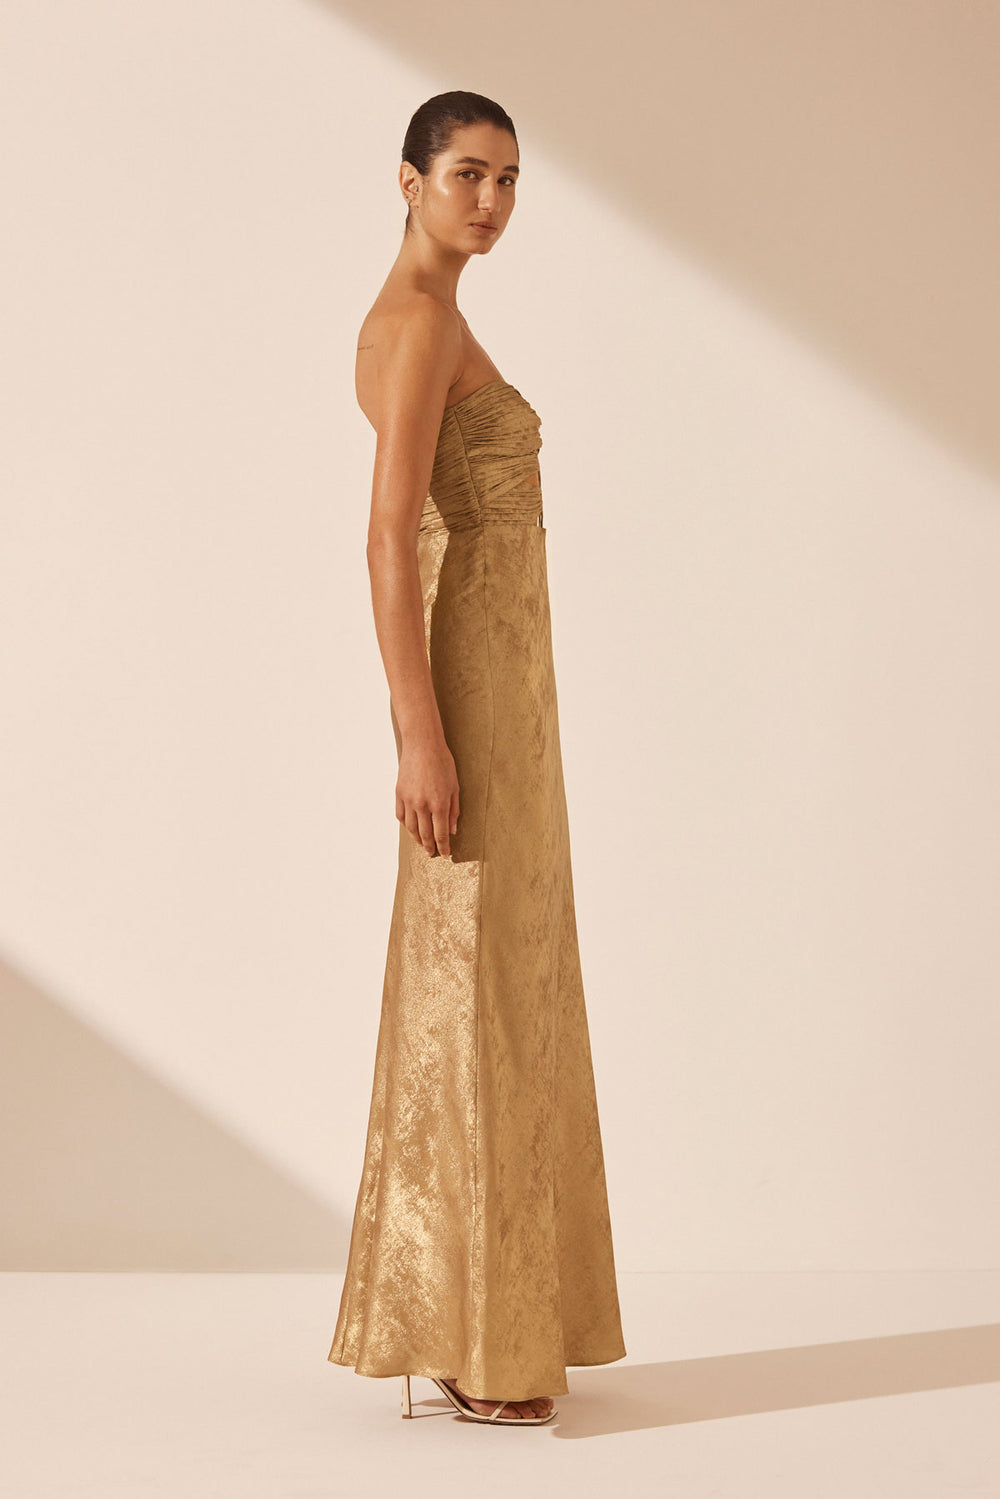 ROYALE STRAPLESS LACE UP MAXI DRESS - ROYALE GOLD